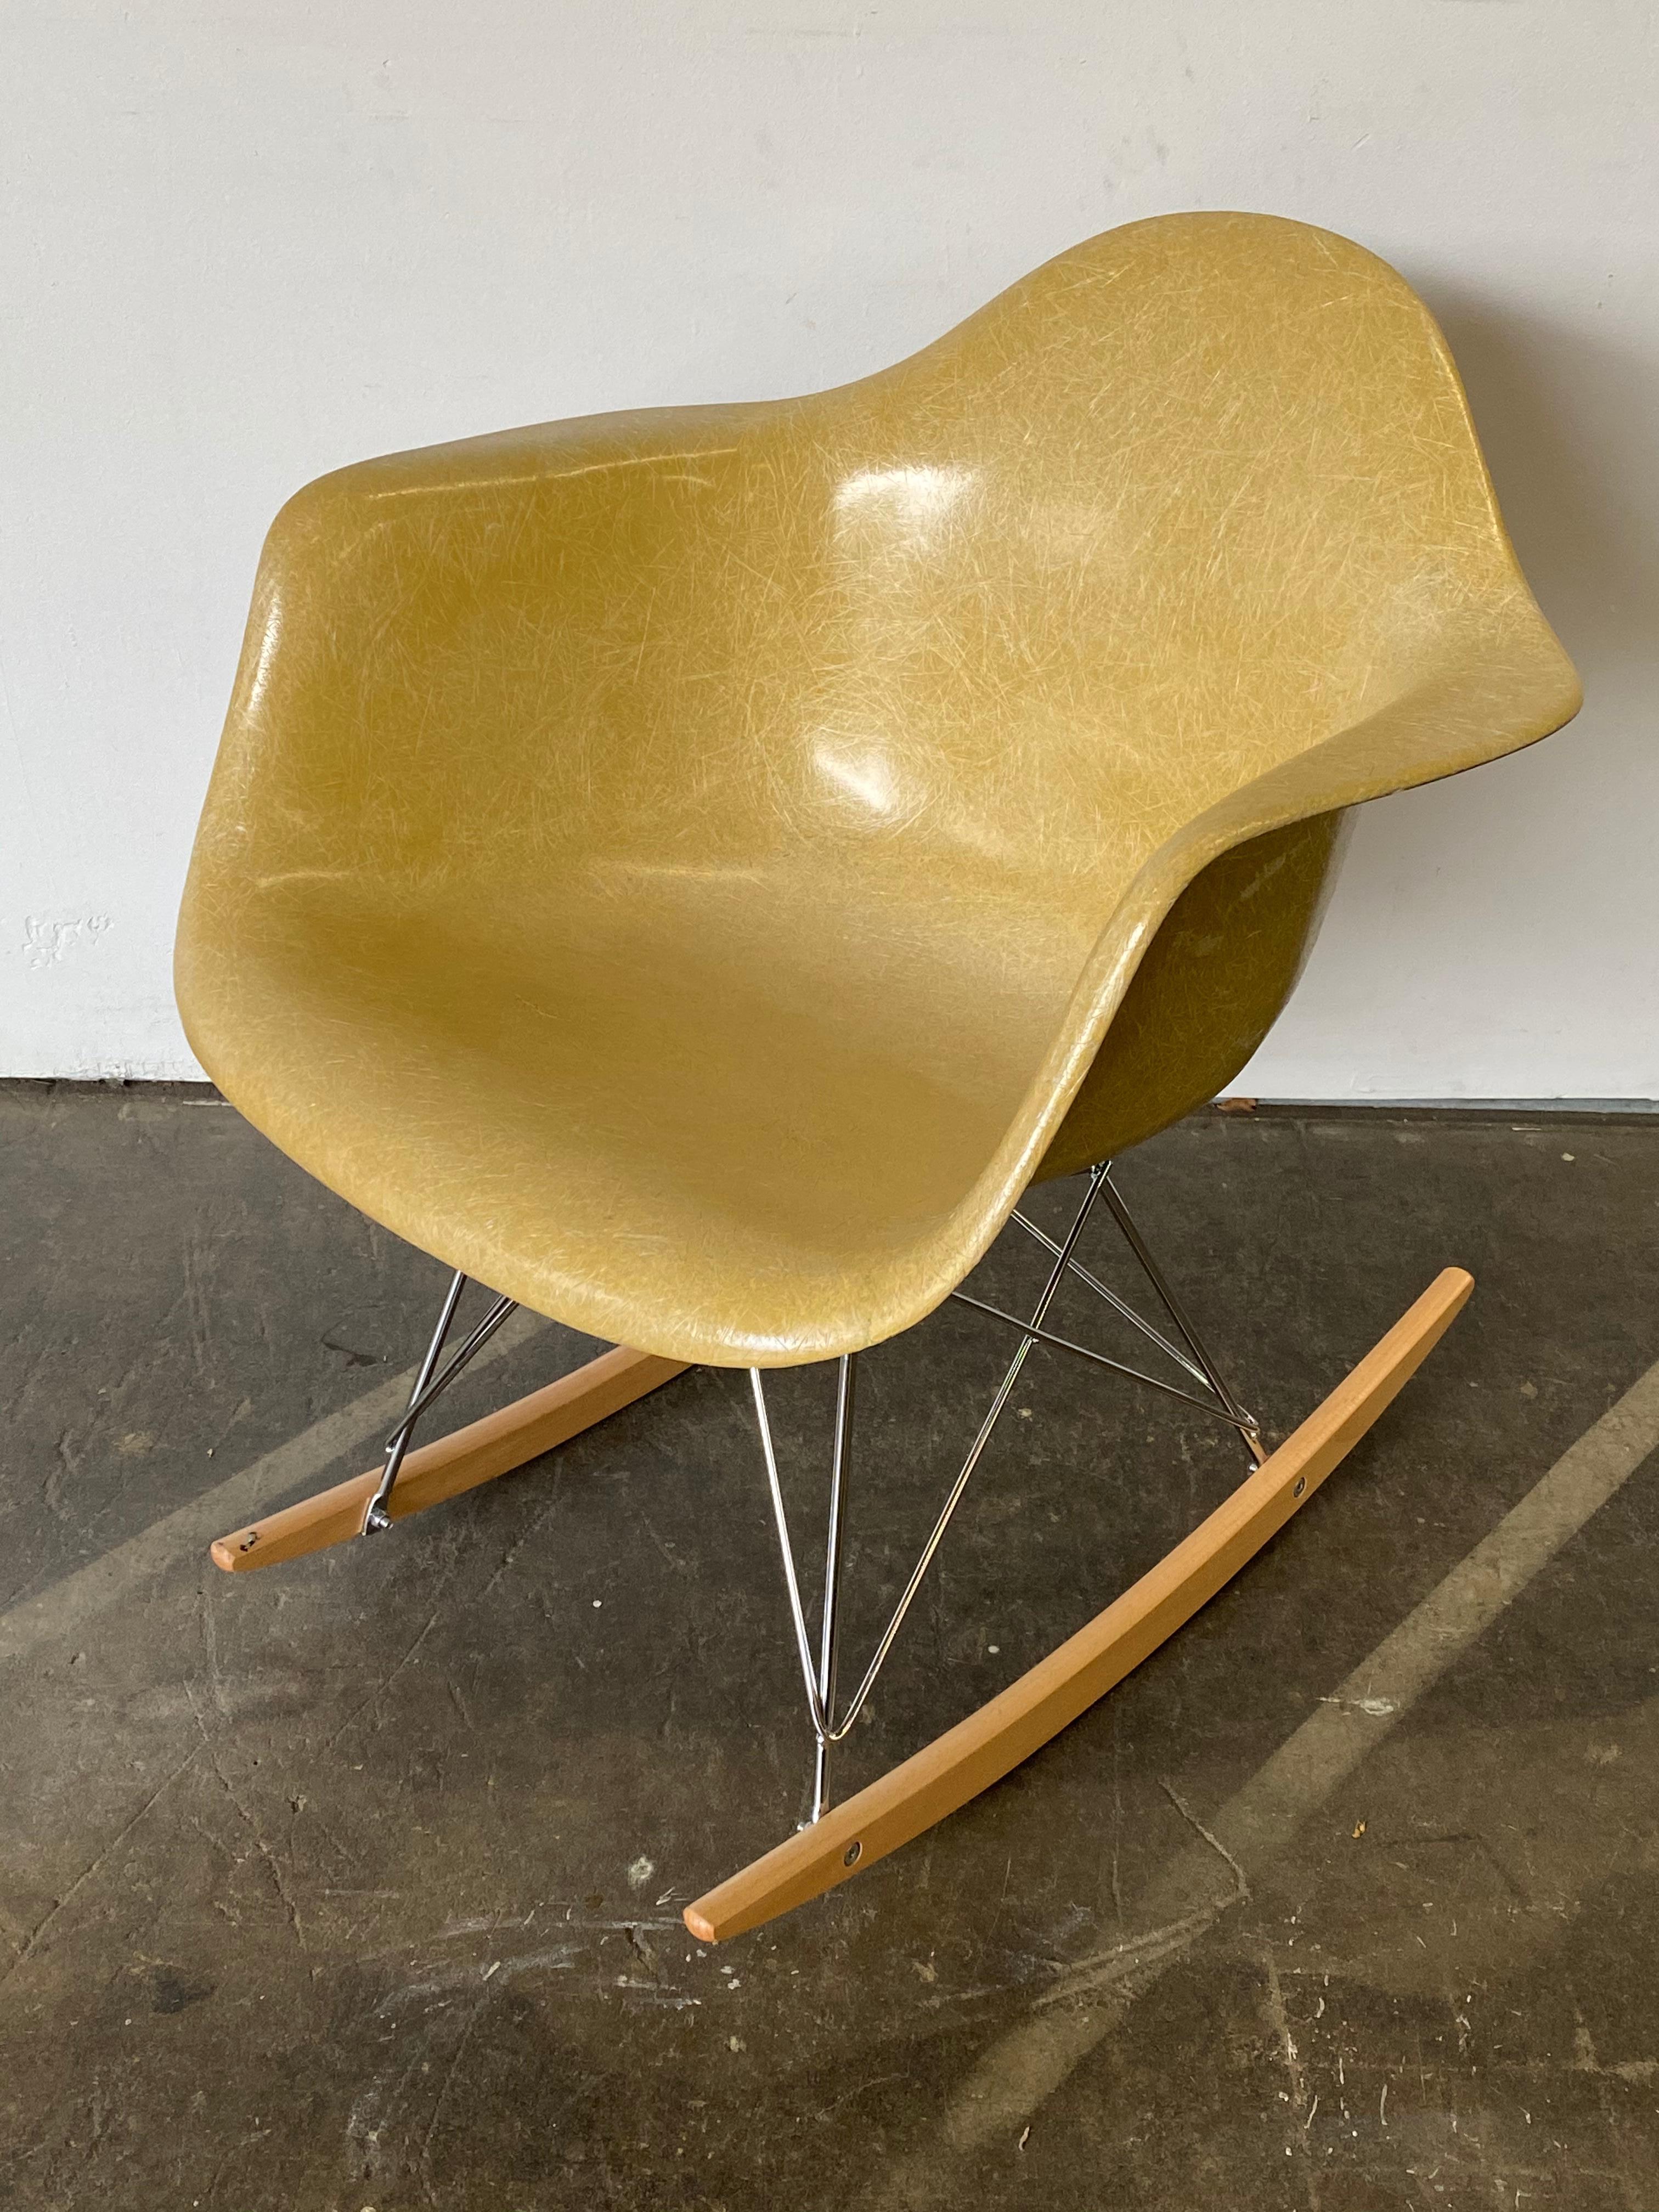 Eames rocking chair in ochre light. Made by Herman Miller and stamped underneath the seat. This chair radiates well-worn vintage charm but does show its history and age. Slight fading in the seat. Stamped Herman Miller and guaranteed authentic. Base